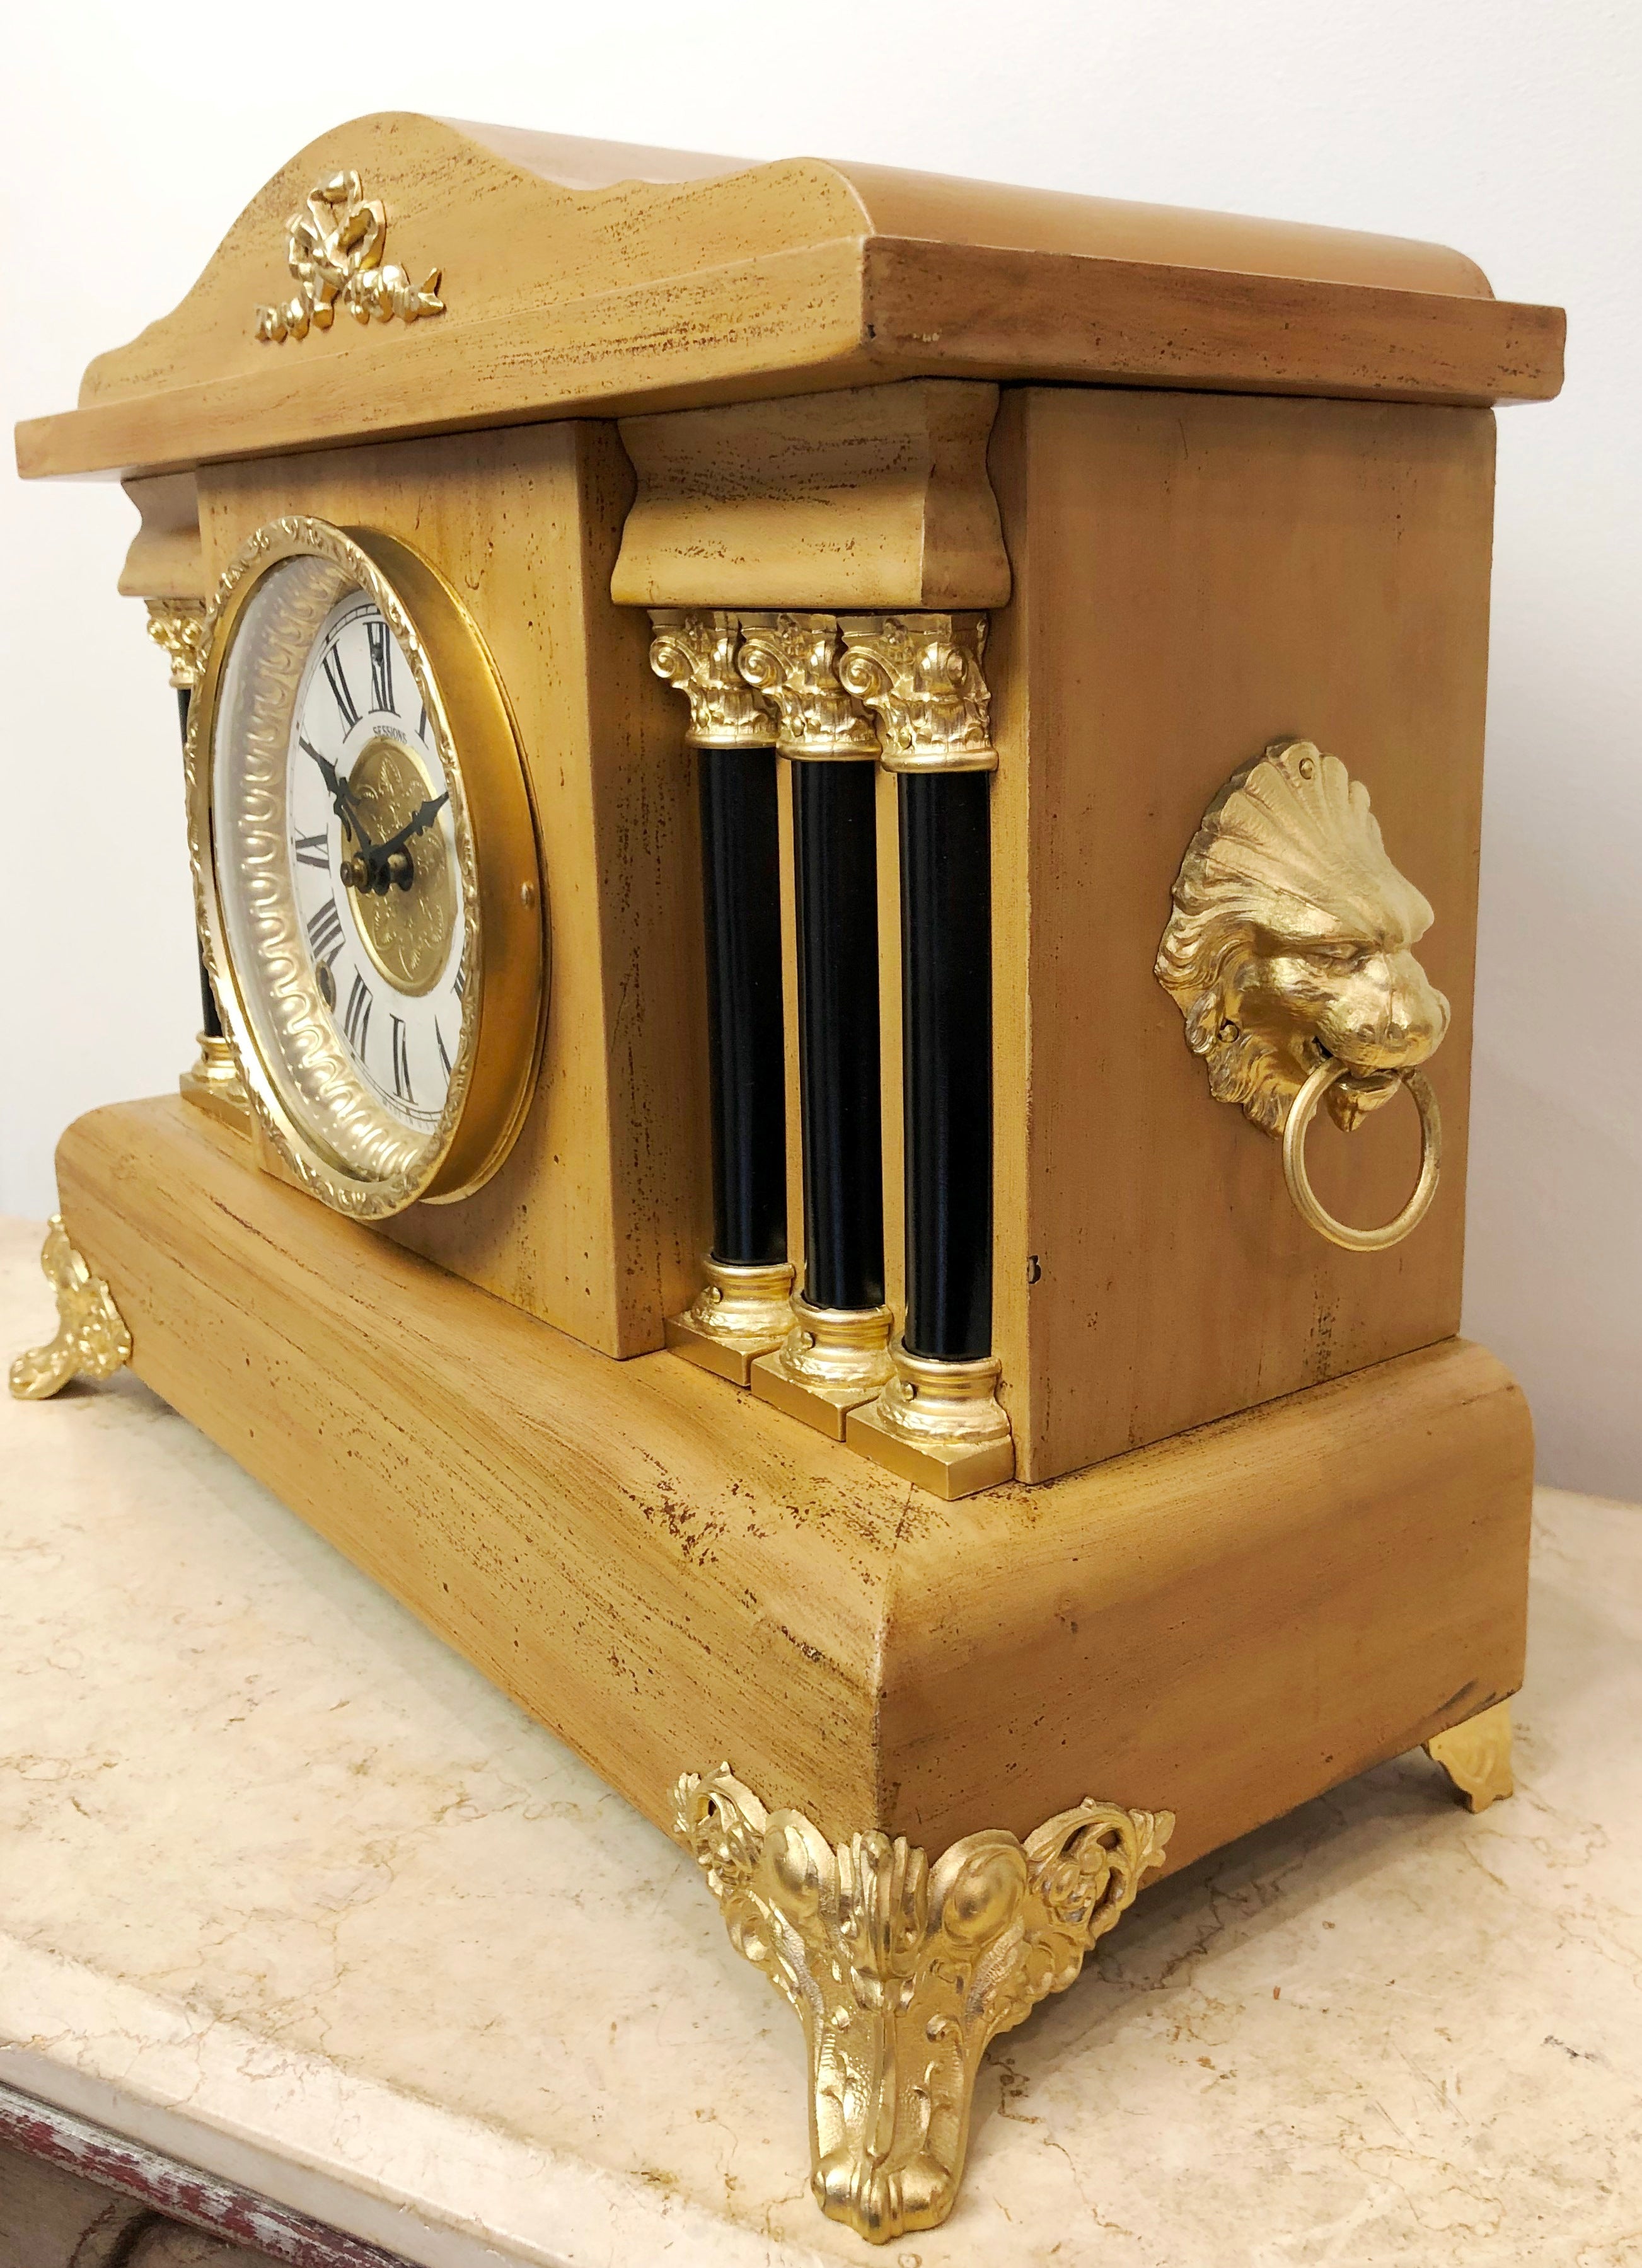 Antique Sessions Hammer on Coil Chime Mantel Clock | eXibit collection